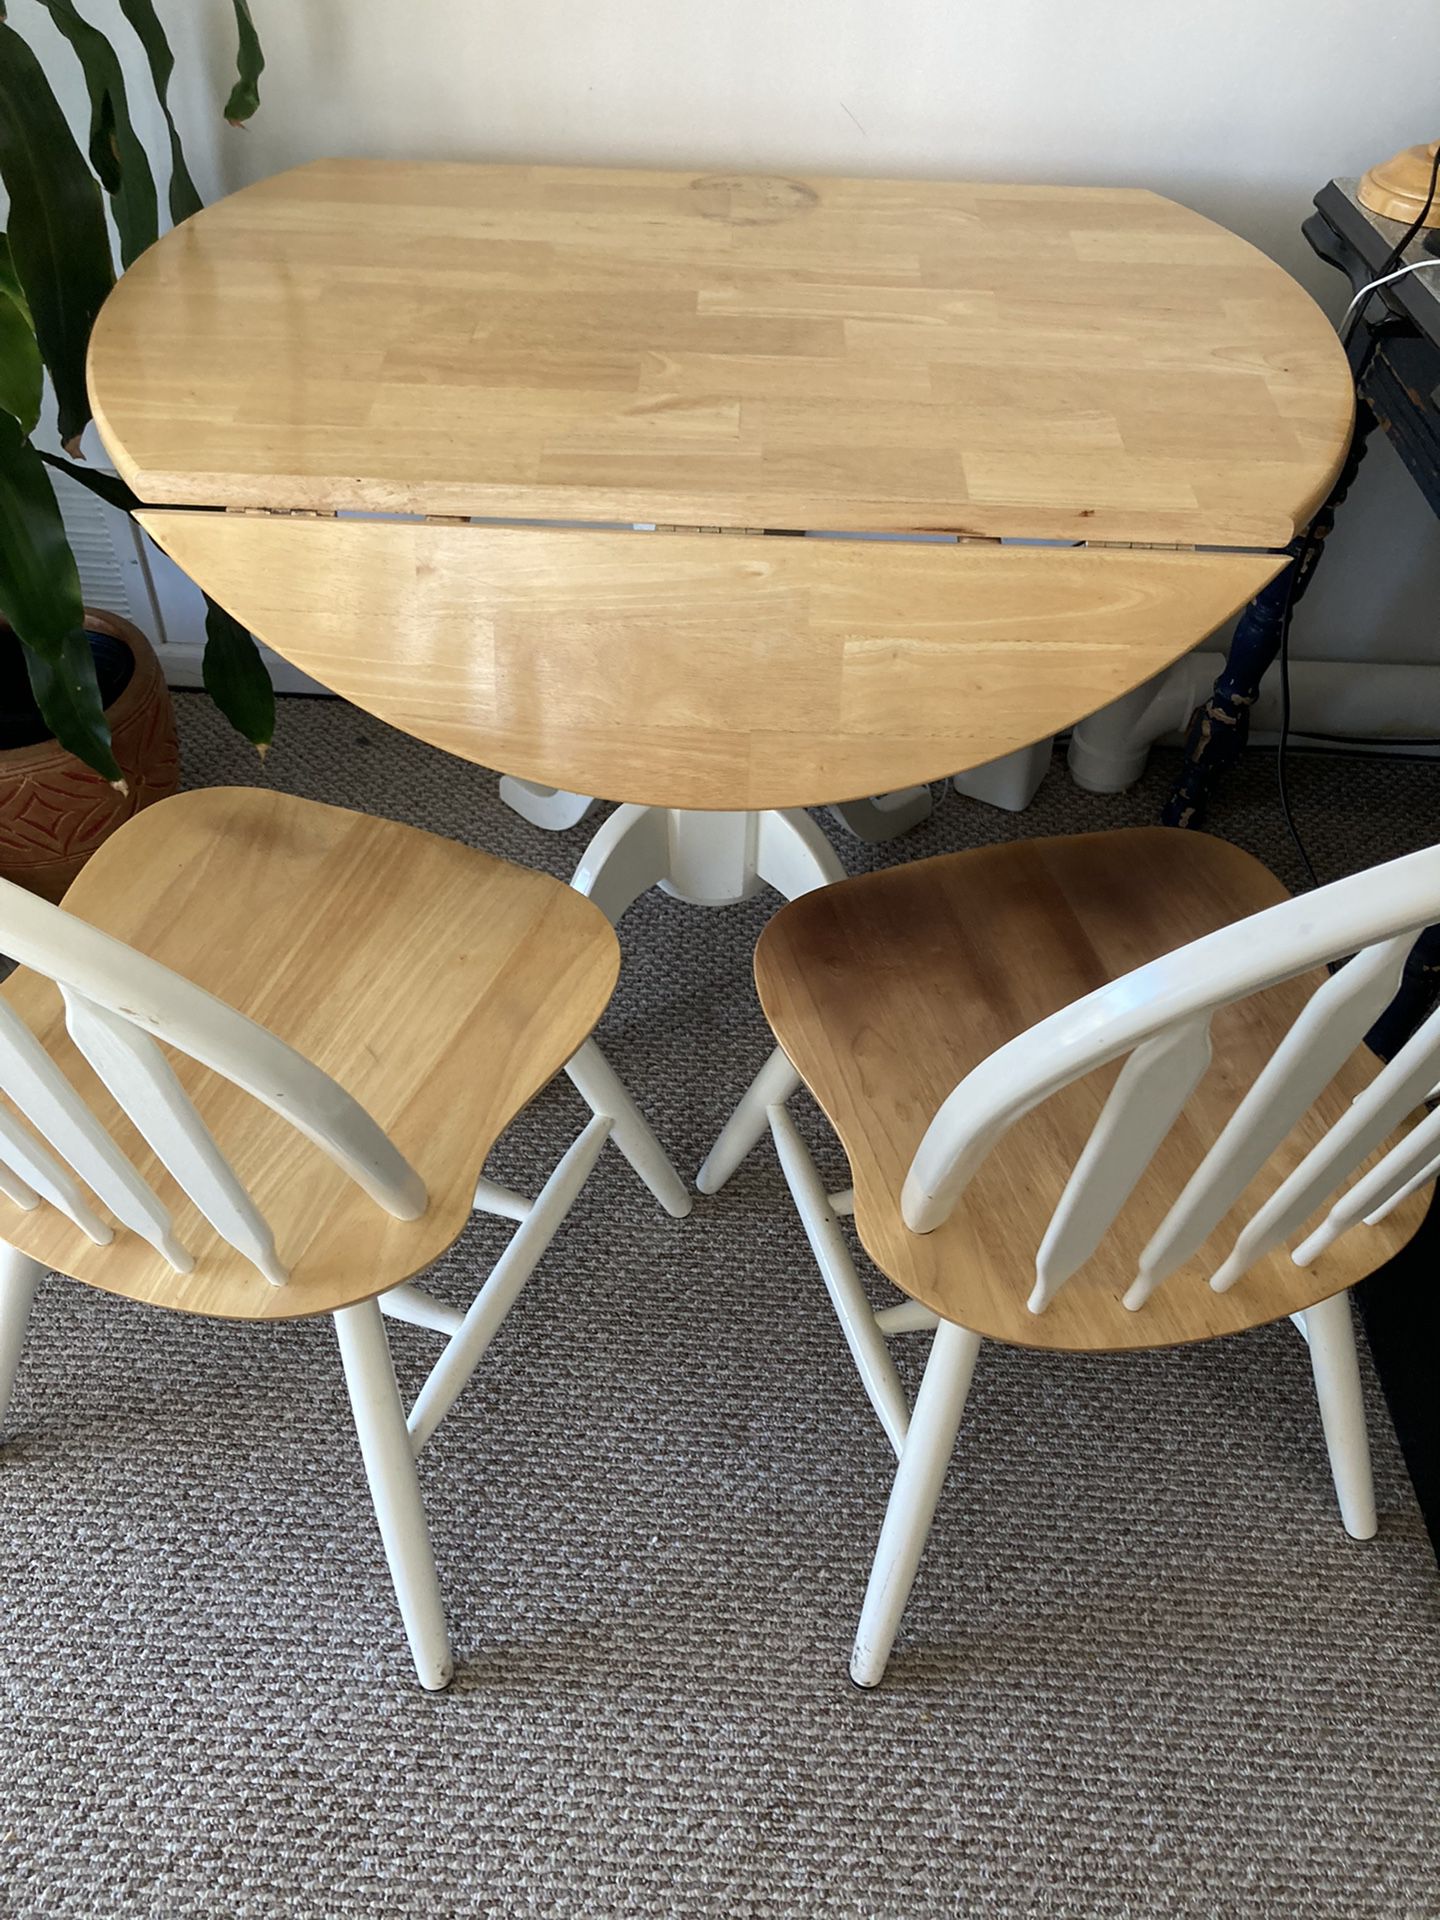 MUST SELL Solid Wood Drop leaf  Table And Chairs Set